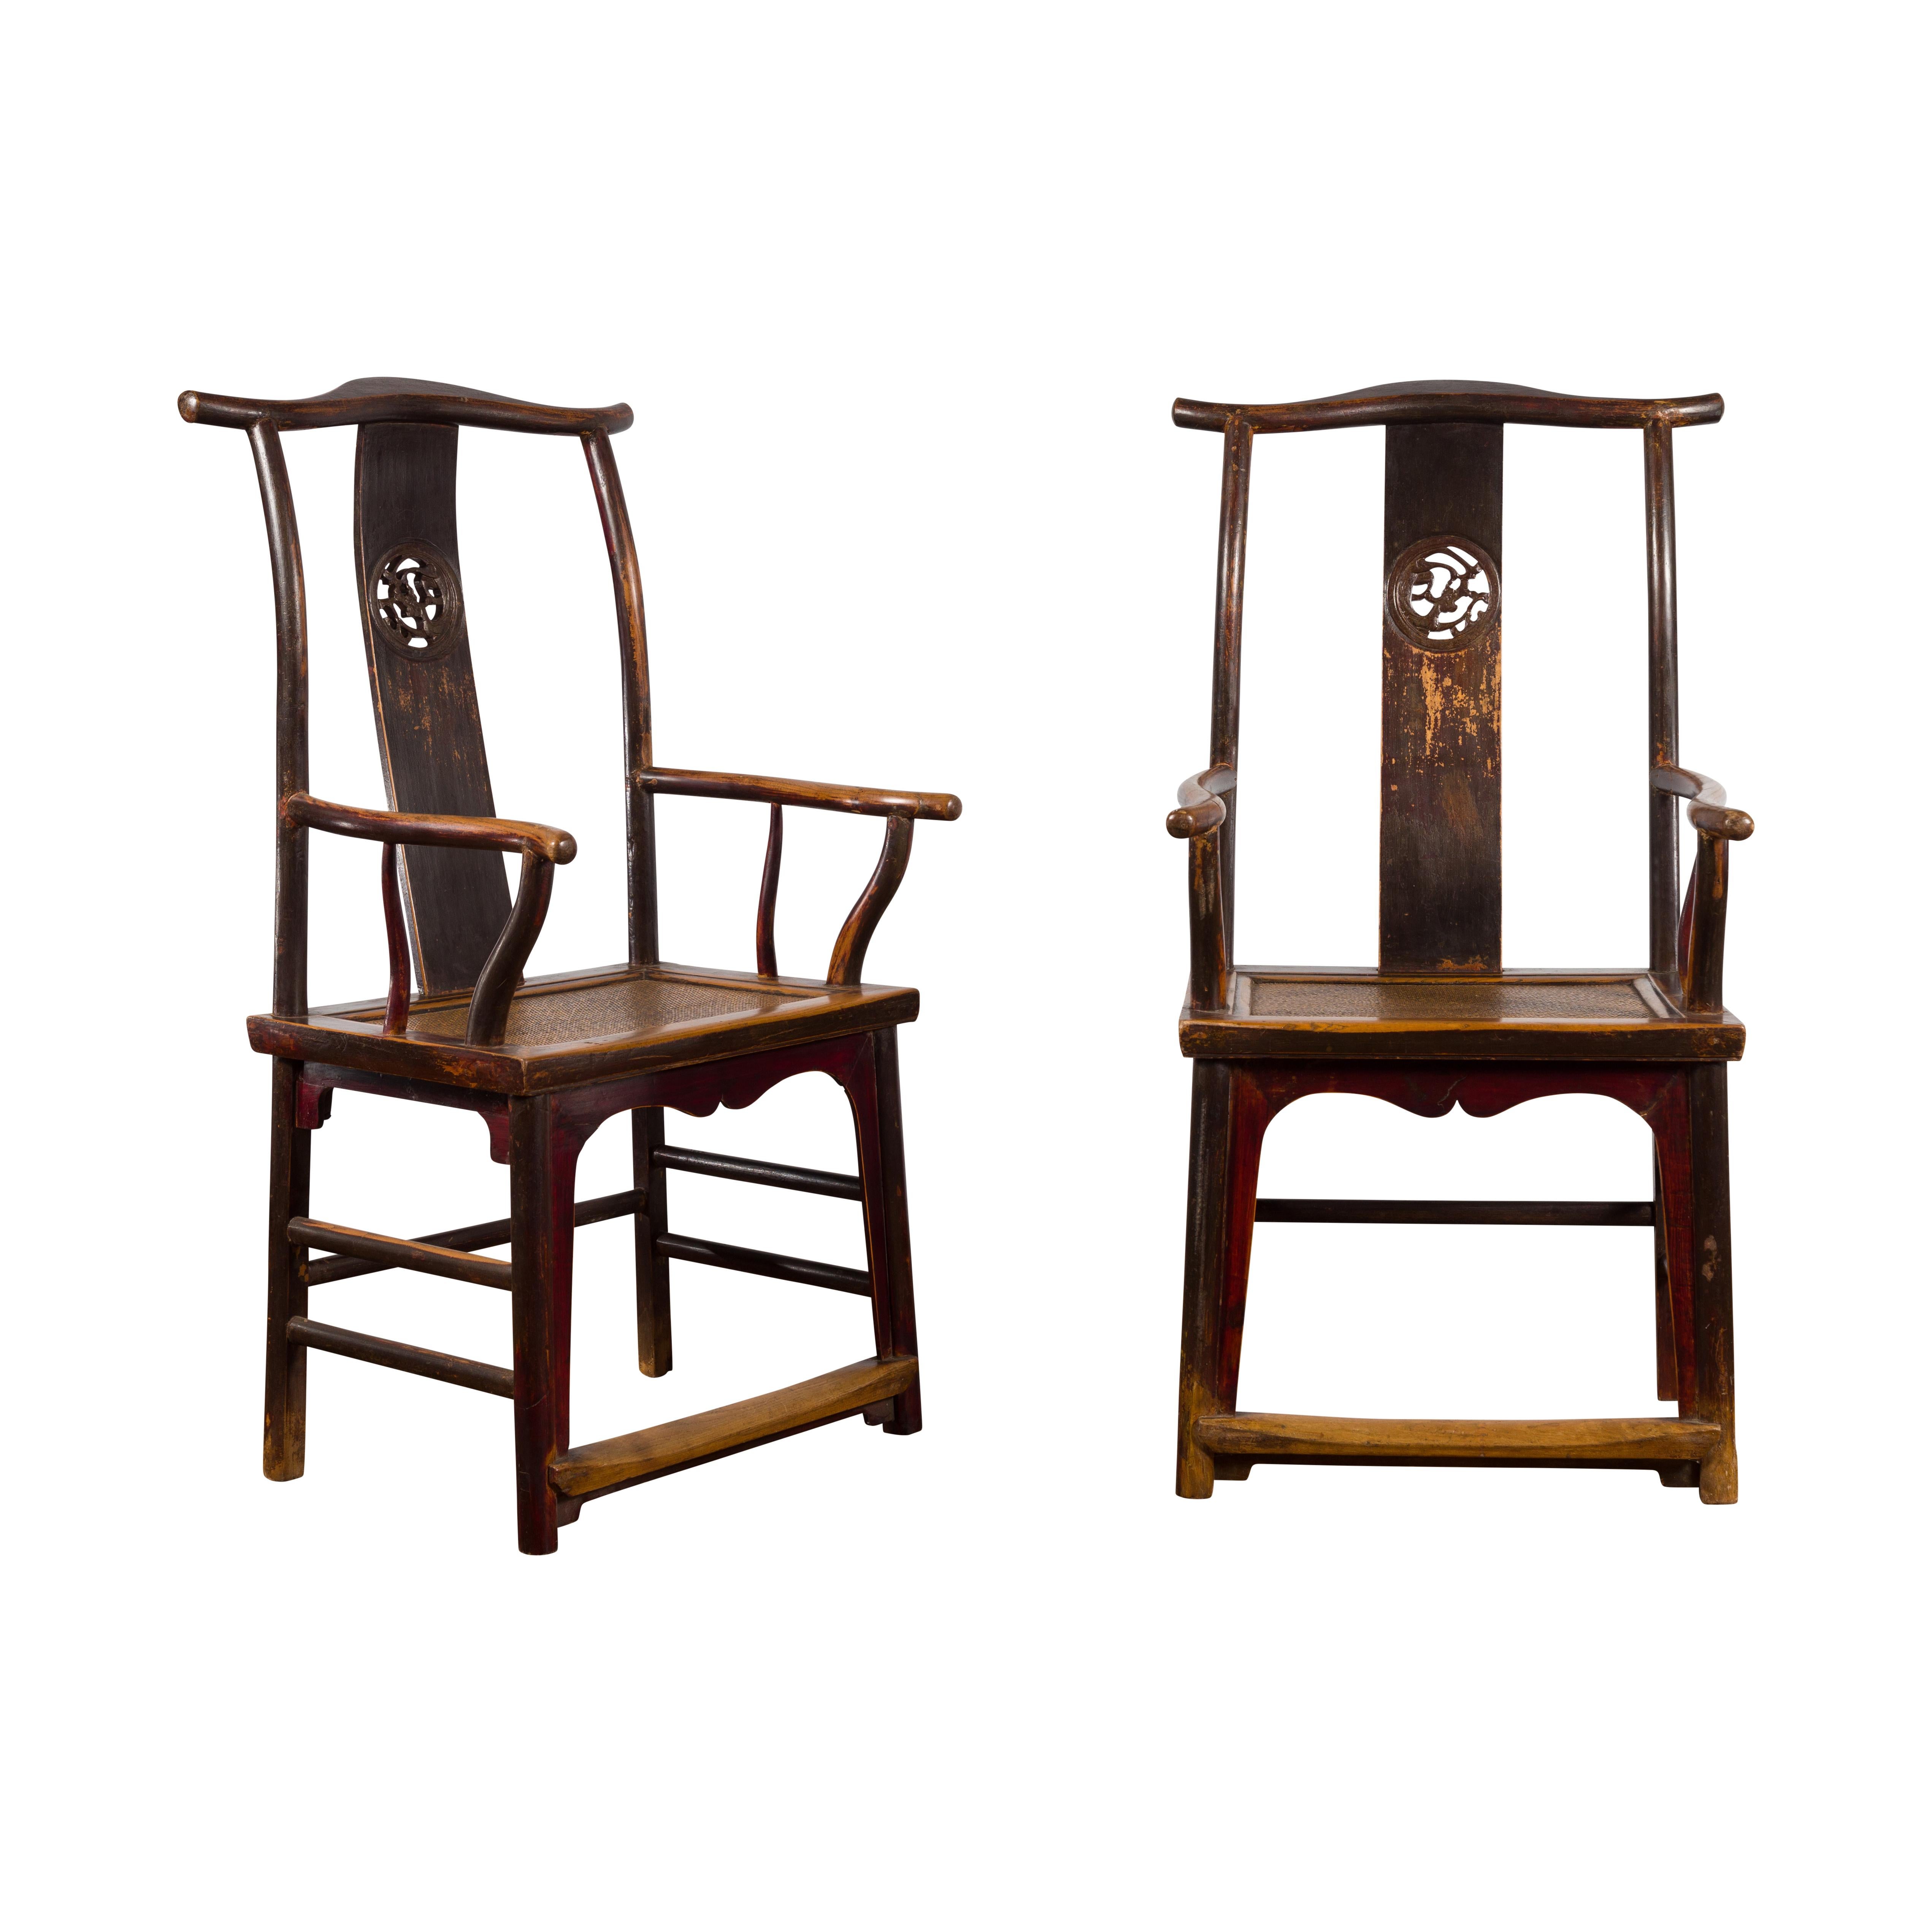 A pair of Chinese Qing Dynasty period yoke-back chairs from the 19th century, made from natural wood with carved splats. Created in China during the Qing Dynasty, each of this pair of armchairs features a tall back, topped with a curving rail. The